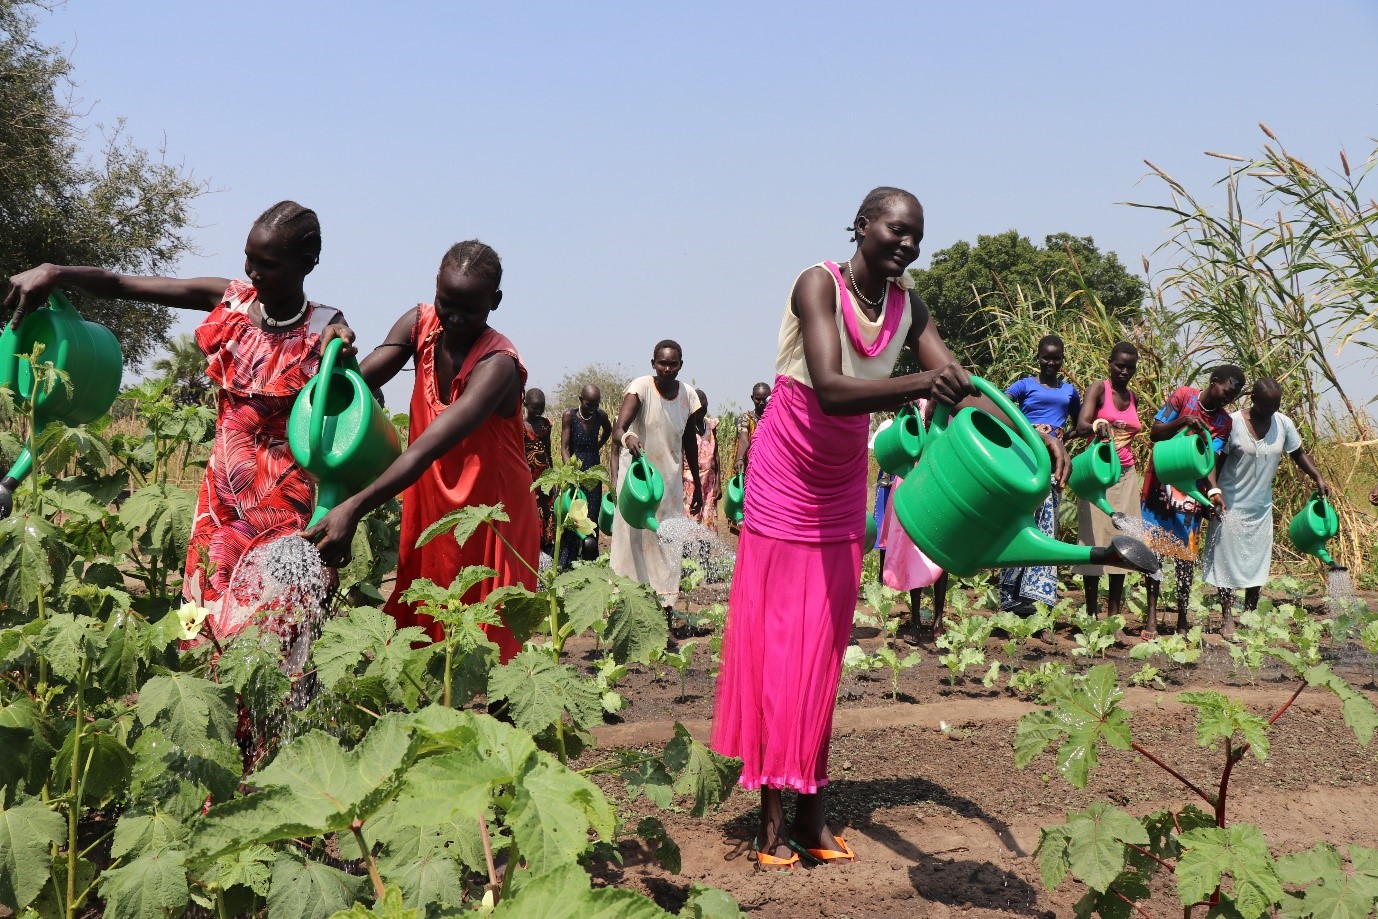 women water crops in a field. they wear brightly coloured dresses.